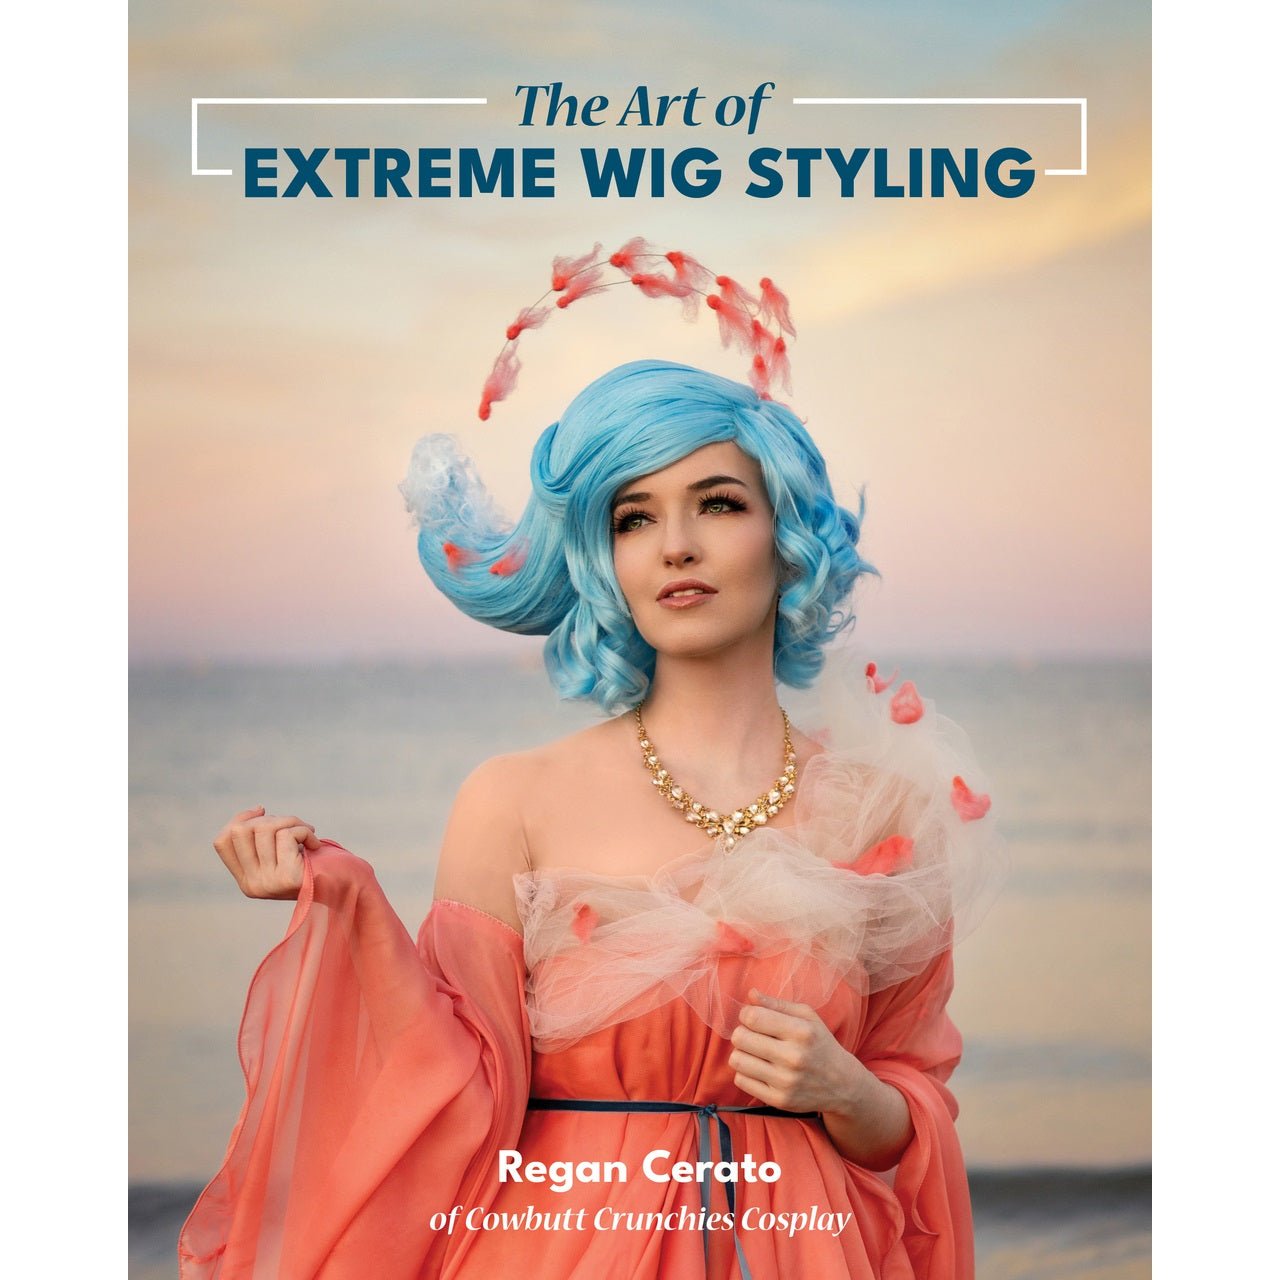 The Art of Extreme Wig Styling Book by Regan Cerato